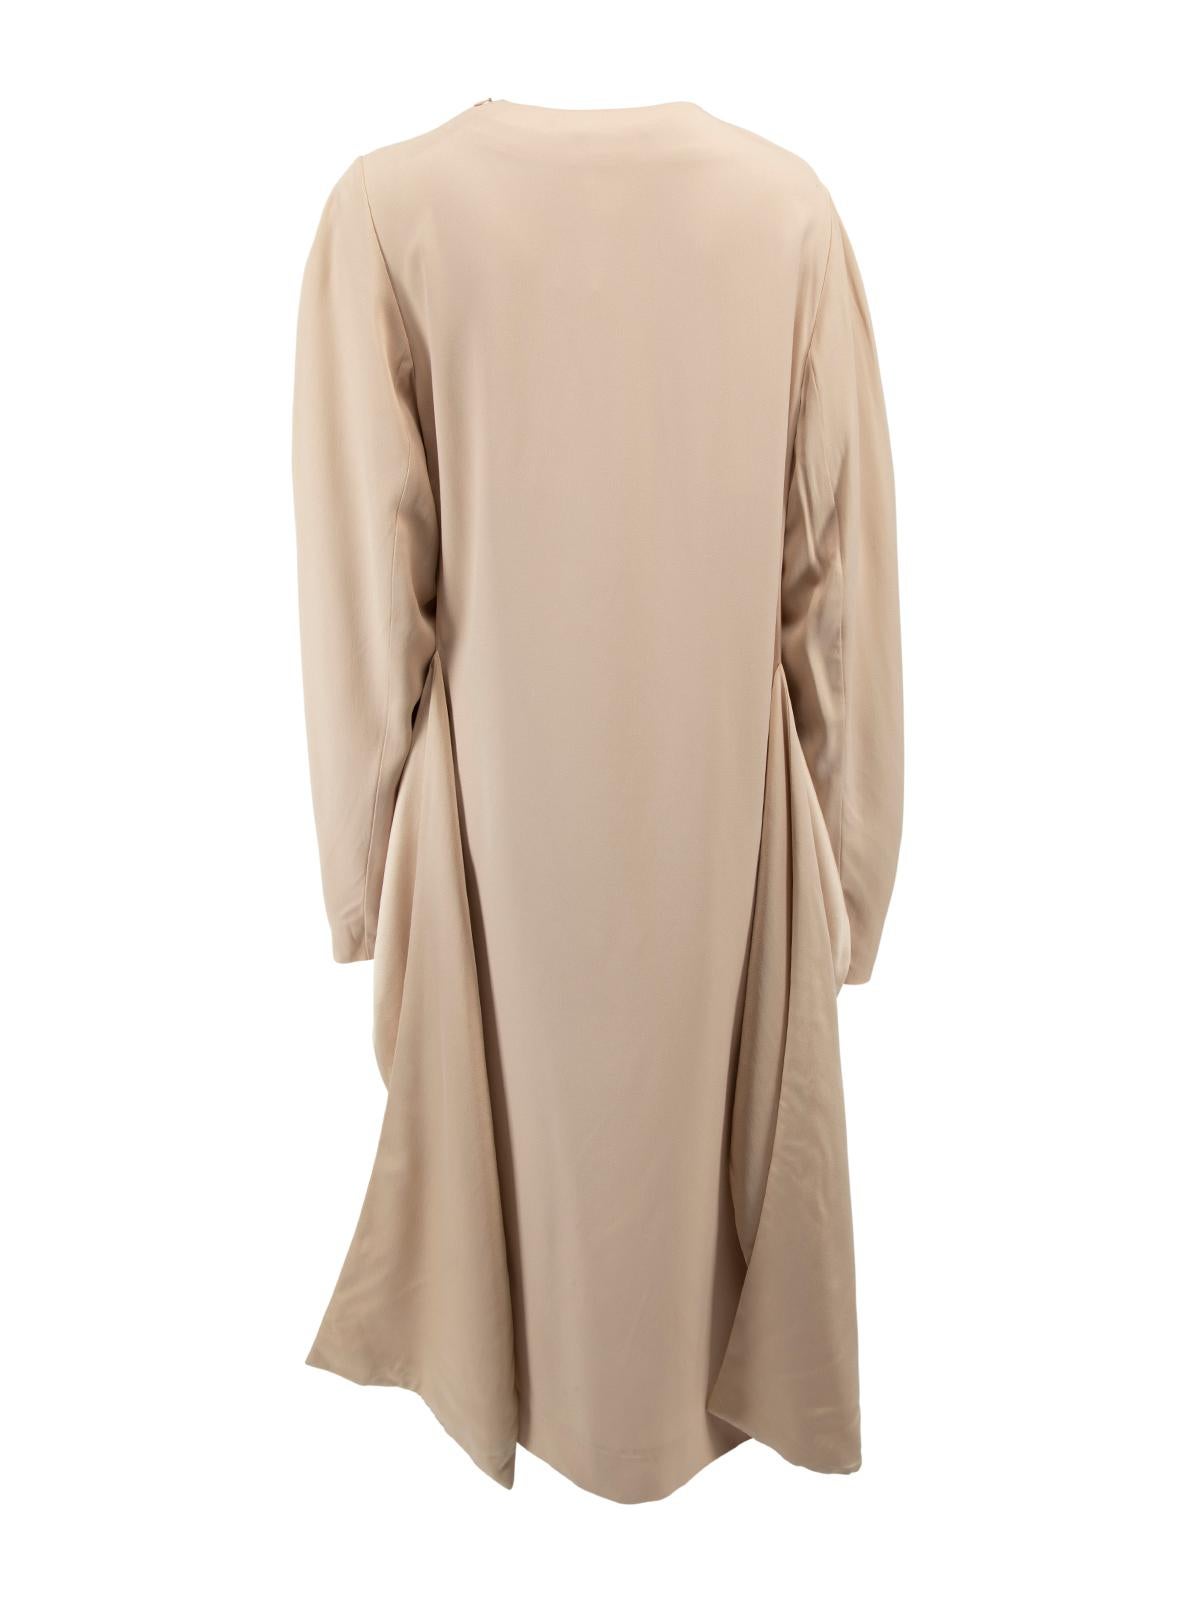 Jil Sander Pastel Nude Long Sleeve Maxi Dress Size S In New Condition For Sale In London, GB